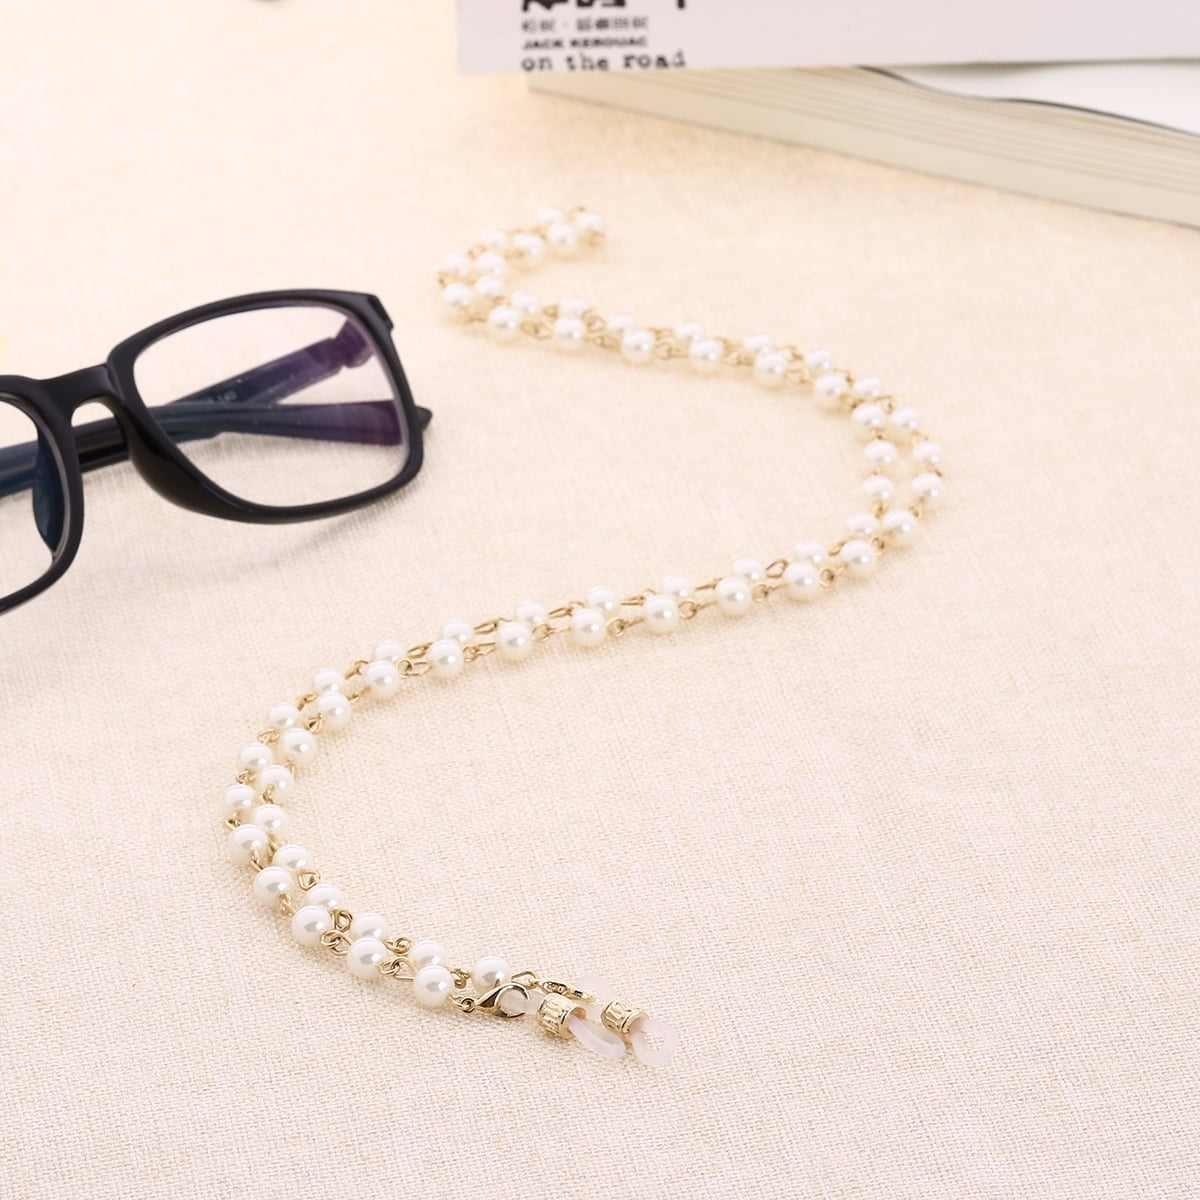 Imitation Pearls Reading Glasses Chain Beaded Fashionable Neck Holding For  Sunglasses, Reading Glasses And More Drawstring Cord Holder Accessory  221119 From Xue08, $3.08